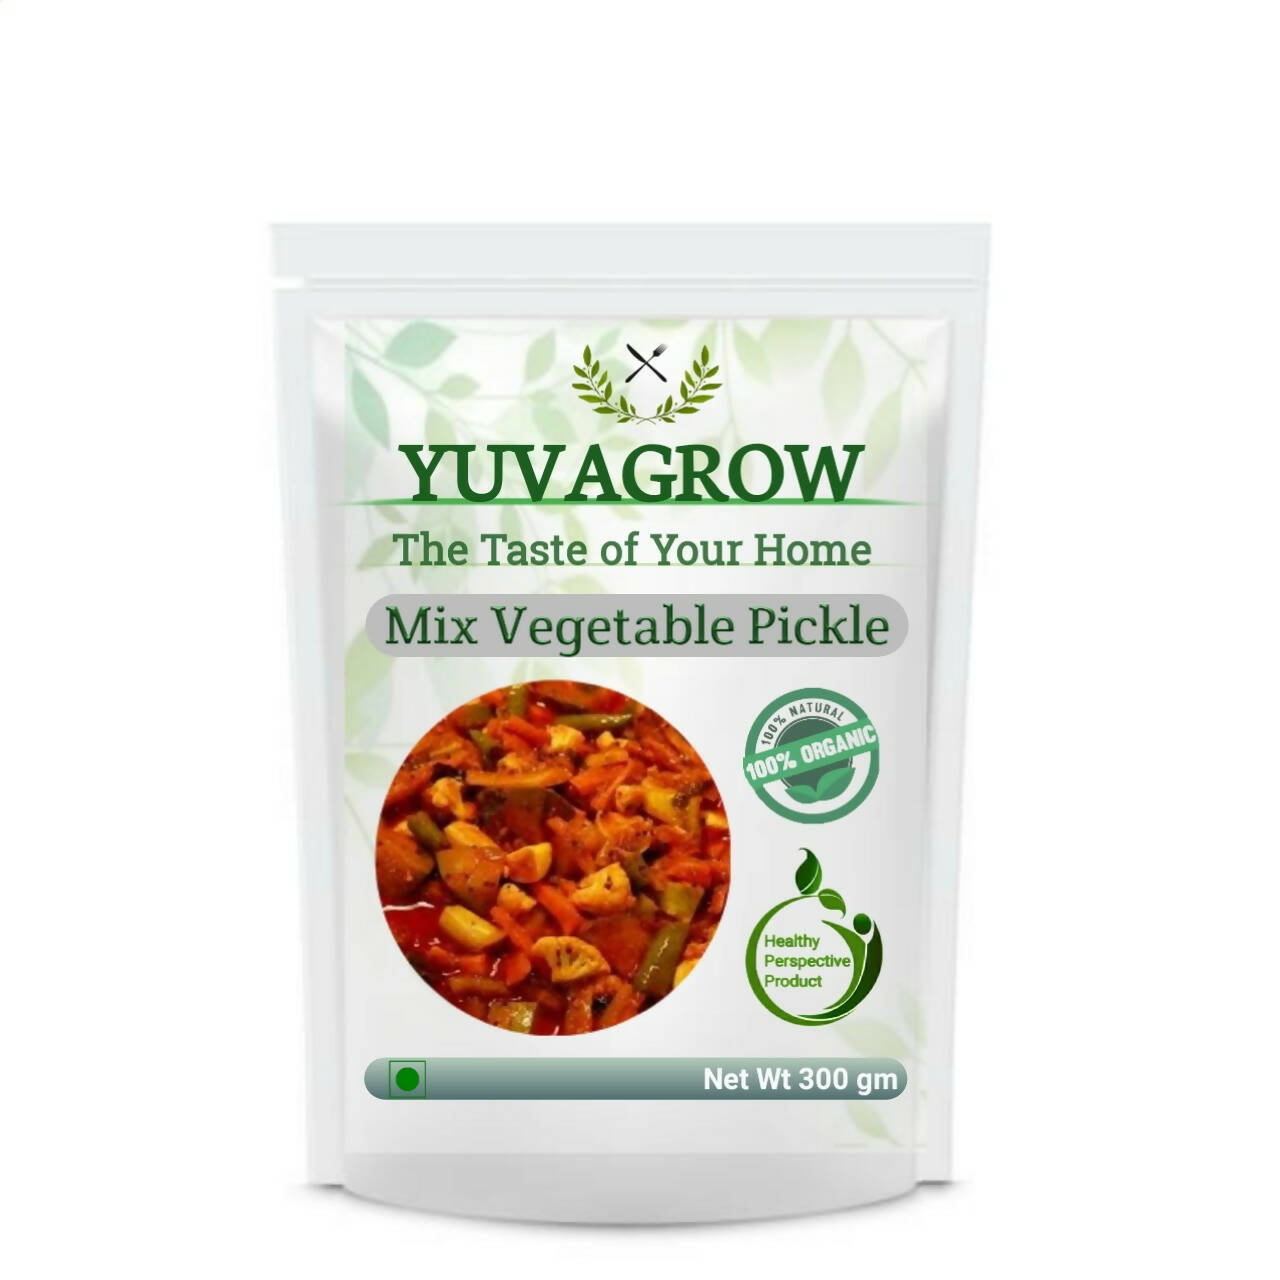 Yuvagrow Mixed Vegetable Pickle - buy in USA, Australia, Canada